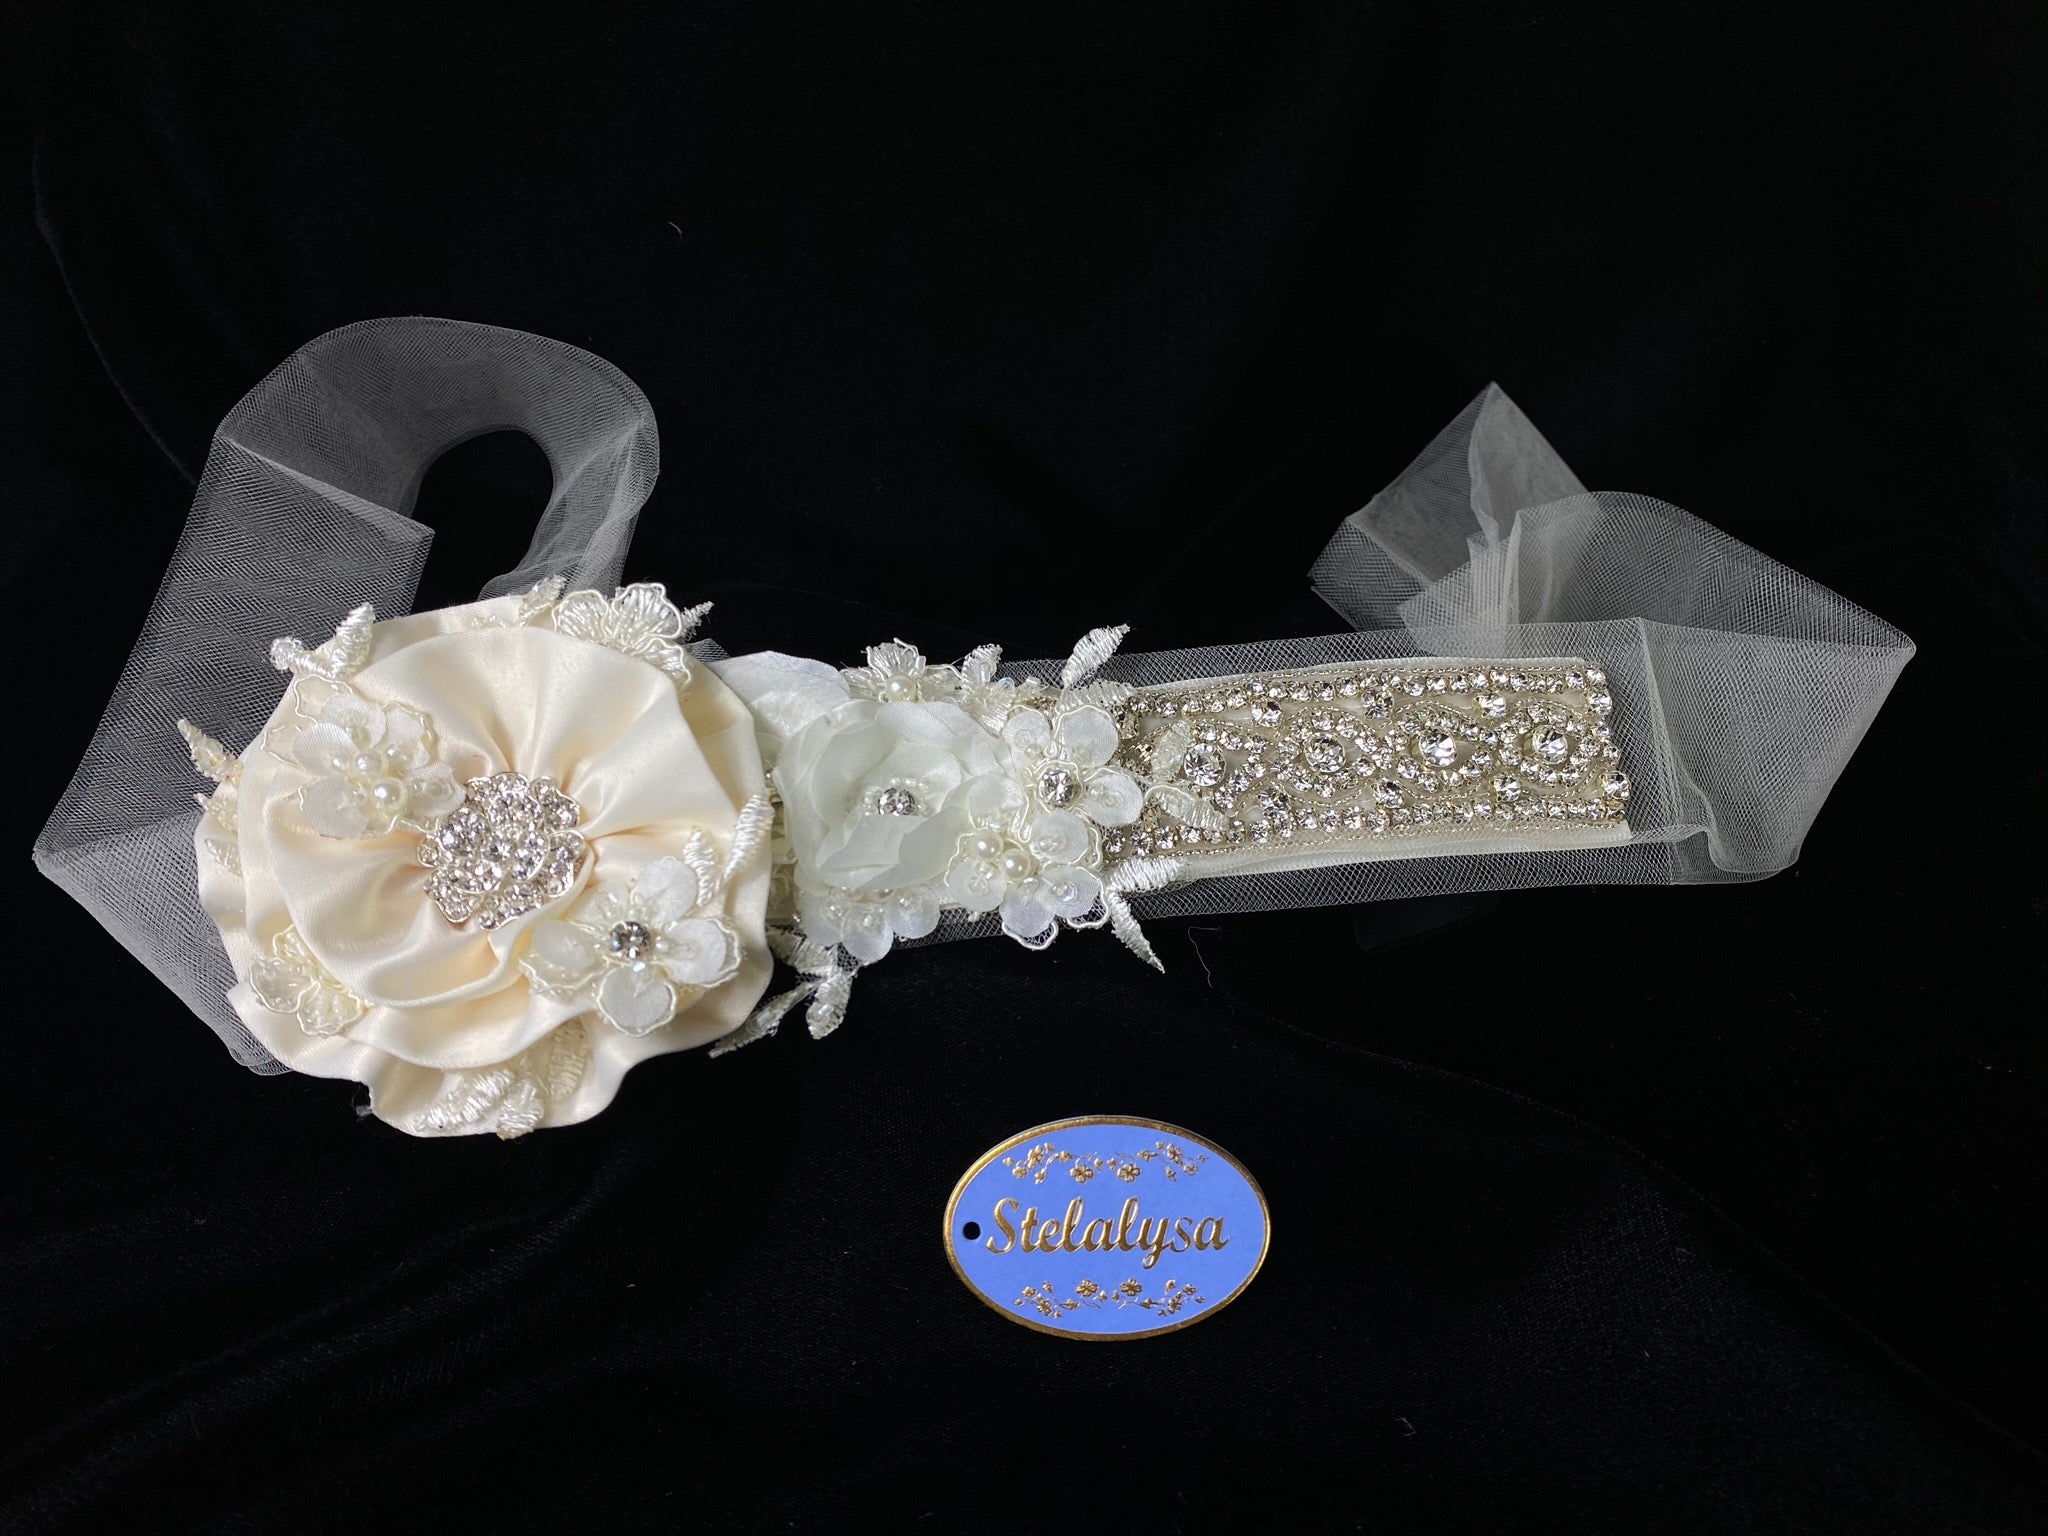 Baptism / Communion Headband with Strings - Ivory Flower and Tulle Strings  This is an elegant unique handmade and one-of-a-kind headband with a large Ivory flower and long ivory tulle strings attached.  The large flower is uniquely decorated with smaller hand made flowers, rhinestones and pearls.  The headband is made of soft ivory tulle, flowers, pearls,  and rhinestones. 